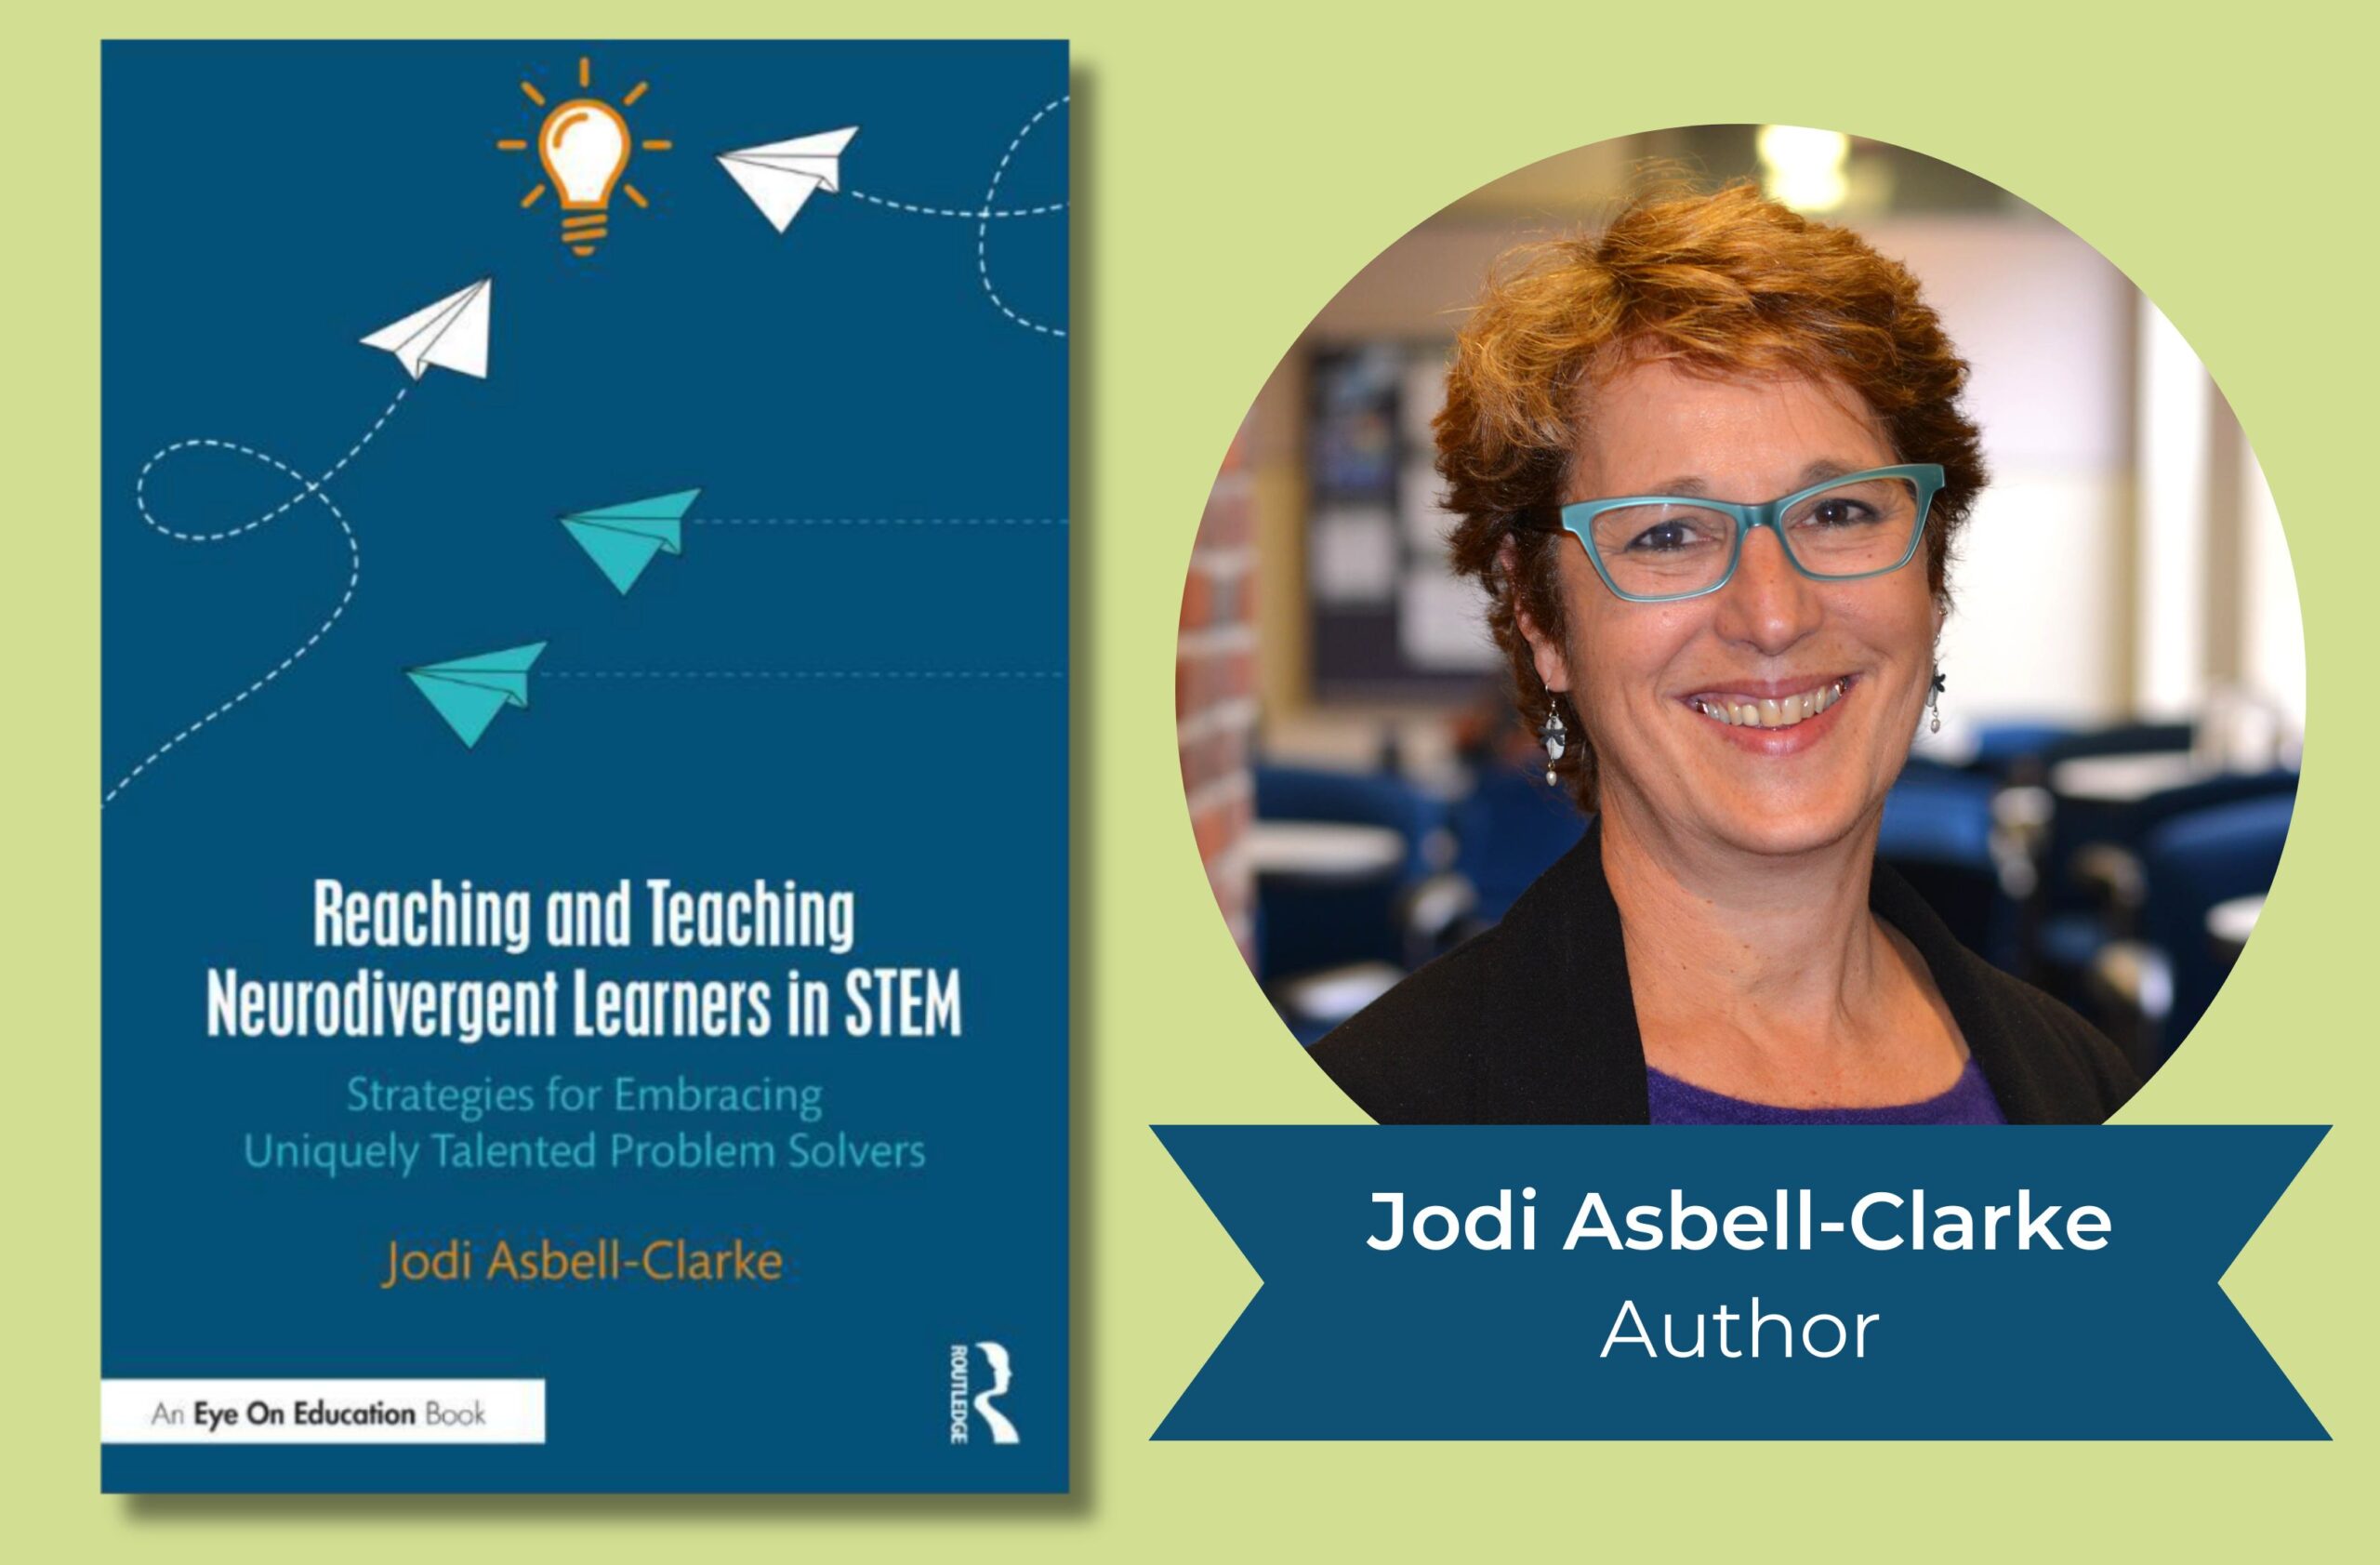 NEW BOOK HELPS EDUCATORS REACH NEURODIVERGENT K-12 LEARNERS IN SCIENCE, TECHNOLOGY, EDUCATION, AND MATH